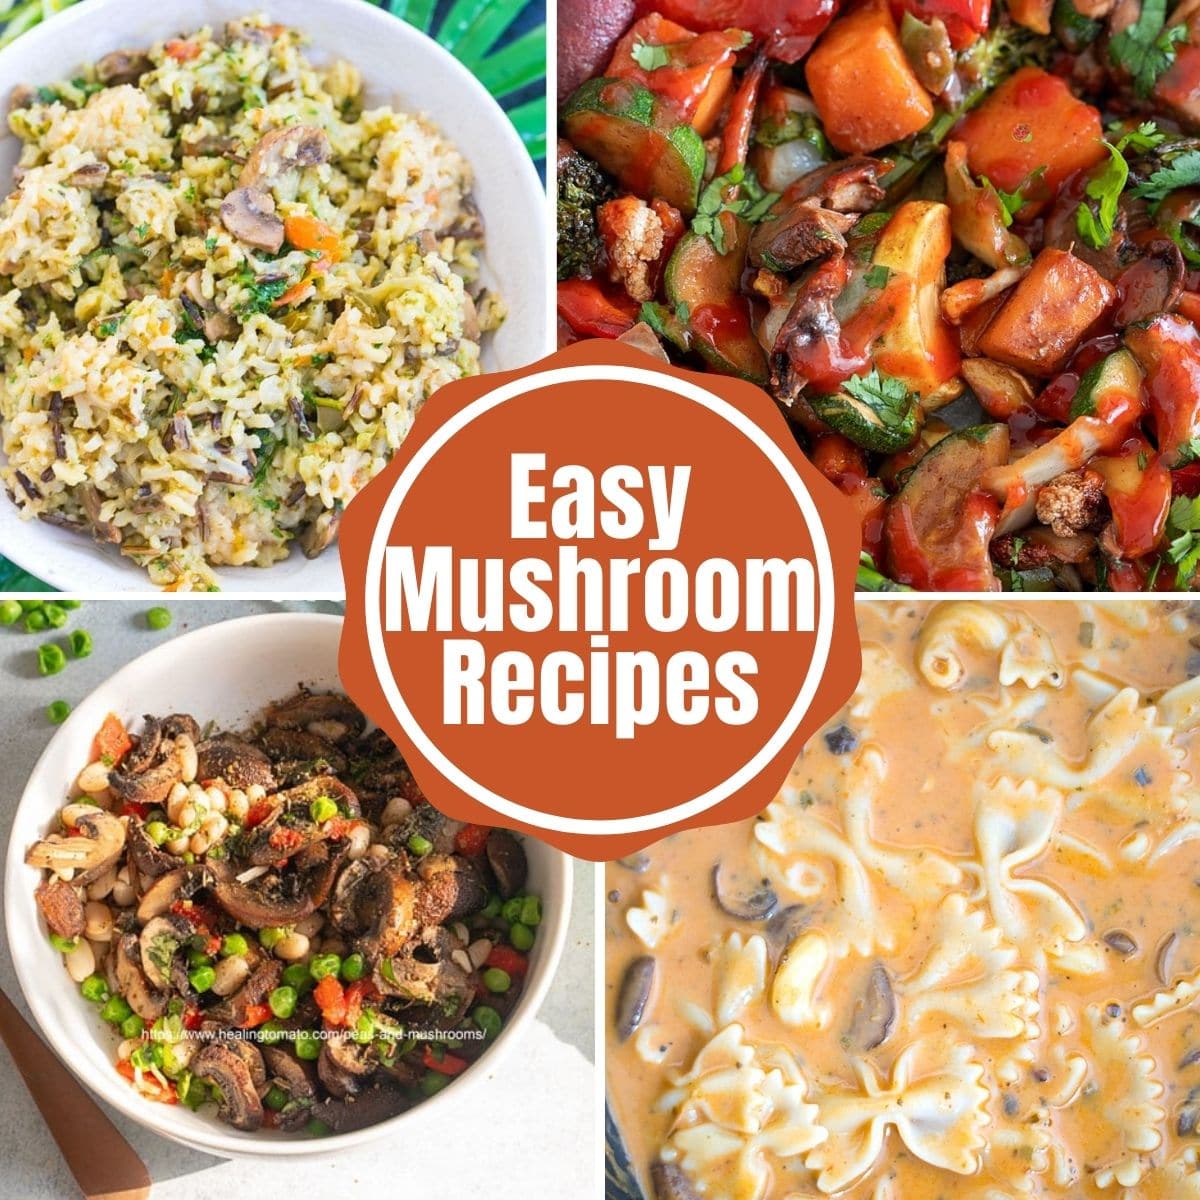 collage of 4 mushroom recipe images and the text overlay of "Easy Mushroom Recipes"